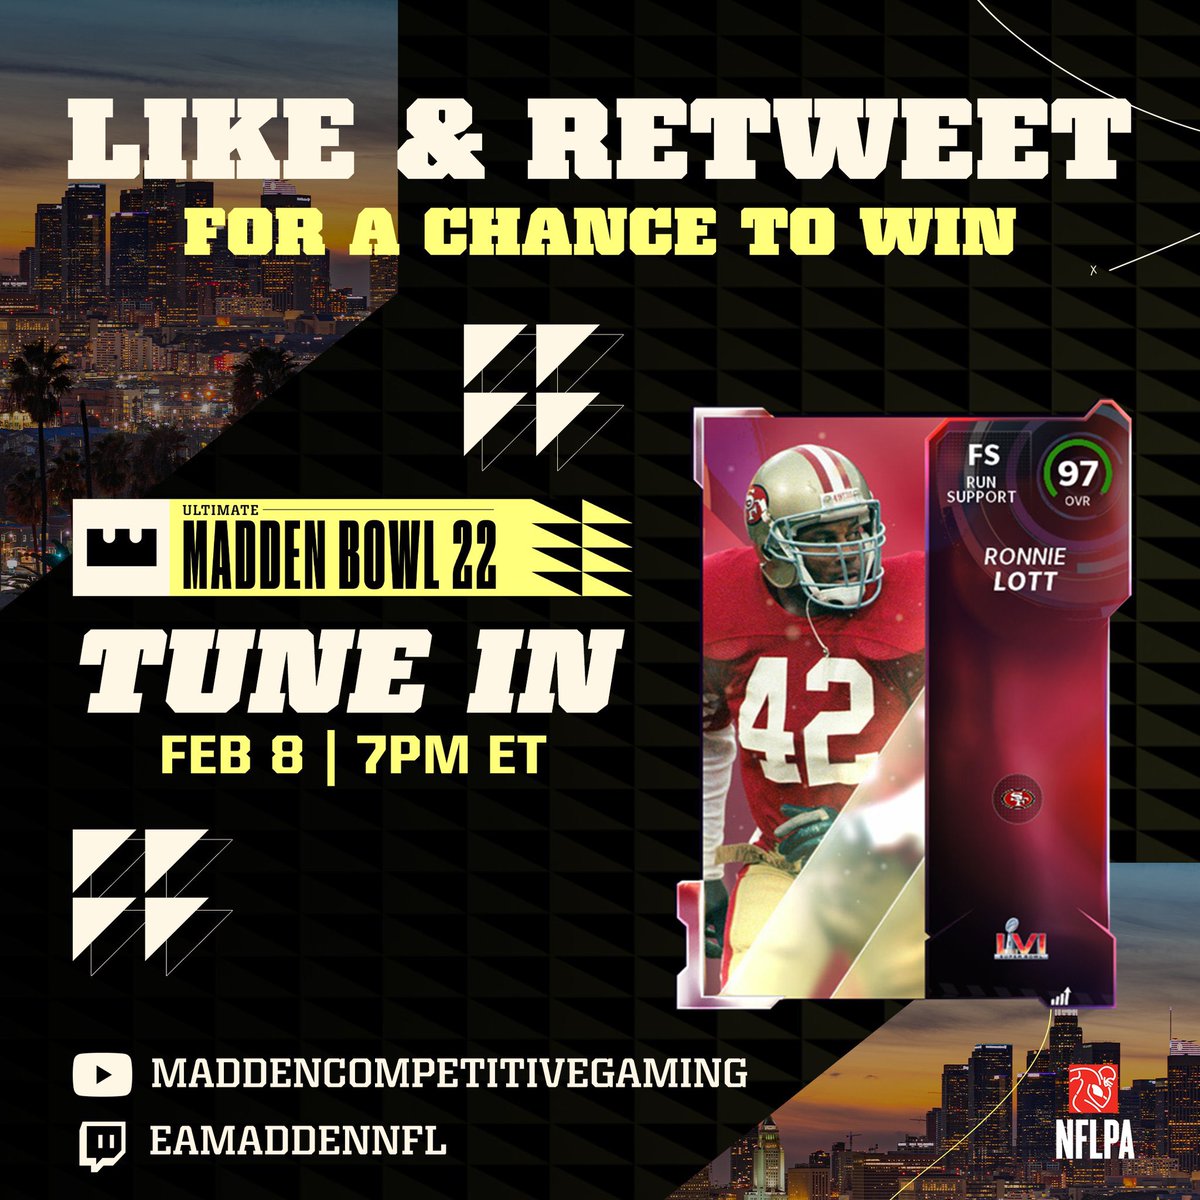 Giveaway Alert!!!🚨

Follow, Like, RT and comment #UltimateMaddenBowl for a chance to win this 97 OVR RONNIE LOTT 😤

Tune in TONIGHT for the finale of the #UltimateMaddenBowl #Madden22 tournament at 7:00p et!!

 